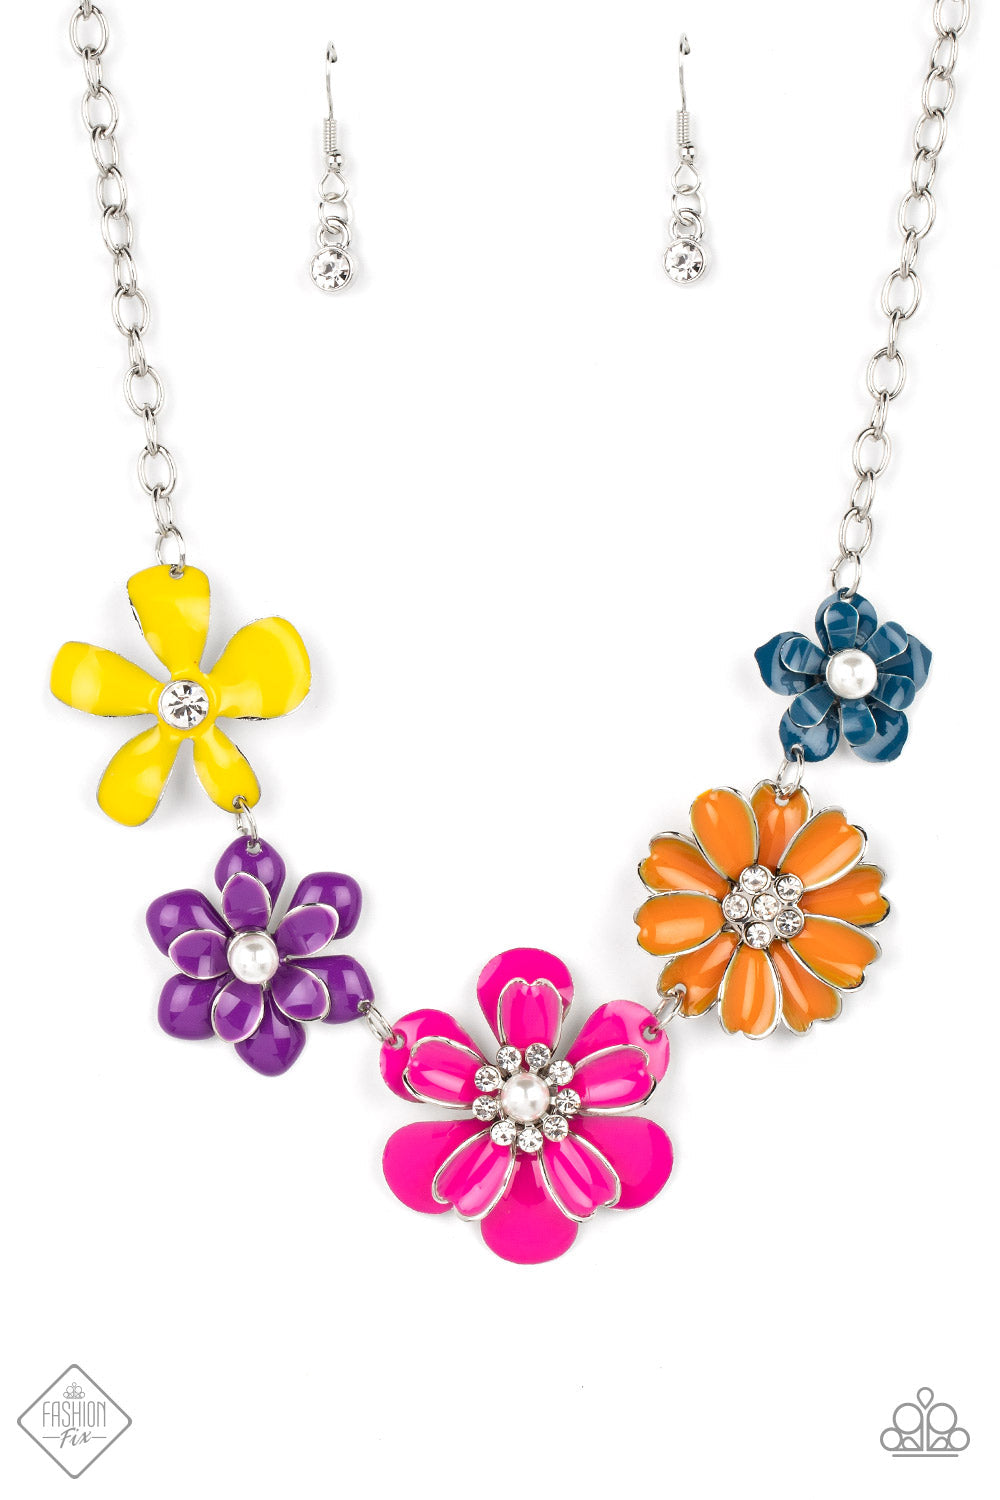 Floral Reverie - Multi Color Flower Necklace - Paparazzi Accessories - Colorful flowers blooms to life along the collar, creating a vibrant statement piece. Each flower features a different centerpiece, flawlessly sprinkling the design with whimsical sparkle and shimmery pearls. Silver edging outlines some of the layered petals, emphasizing the handcrafted character of the design. Features an adjustable clasp closure stylish necklace.